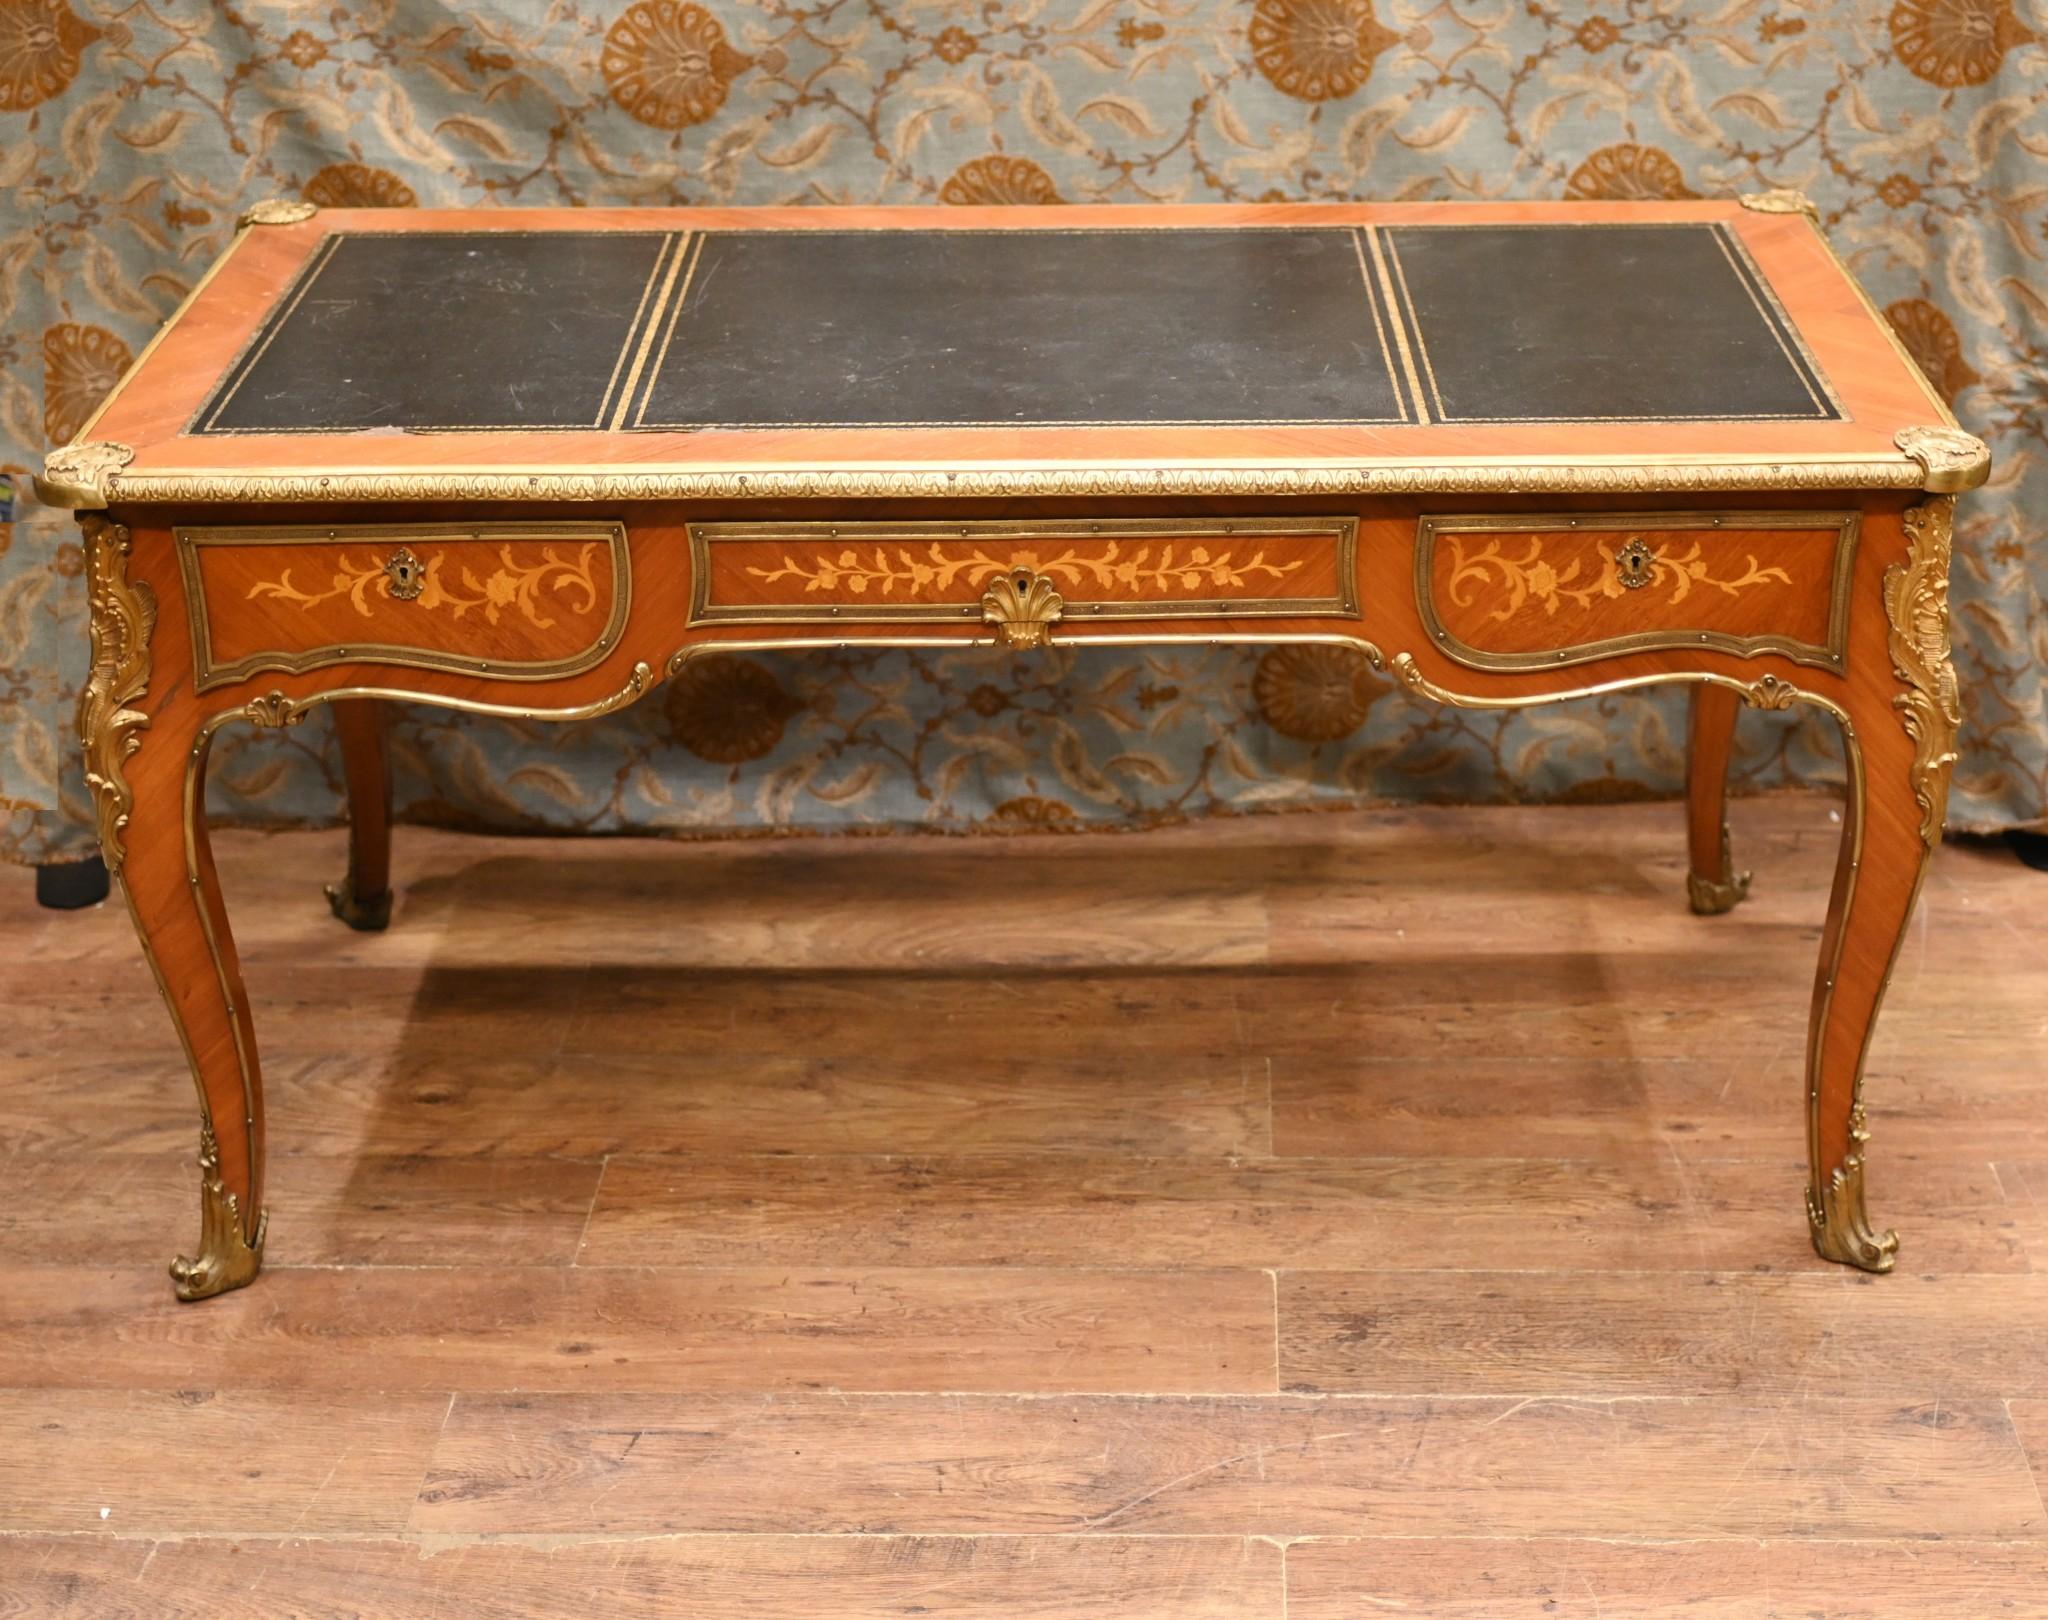 Kingwood Antique Bureau Plat French Inlay Desk Writing Table For Sale